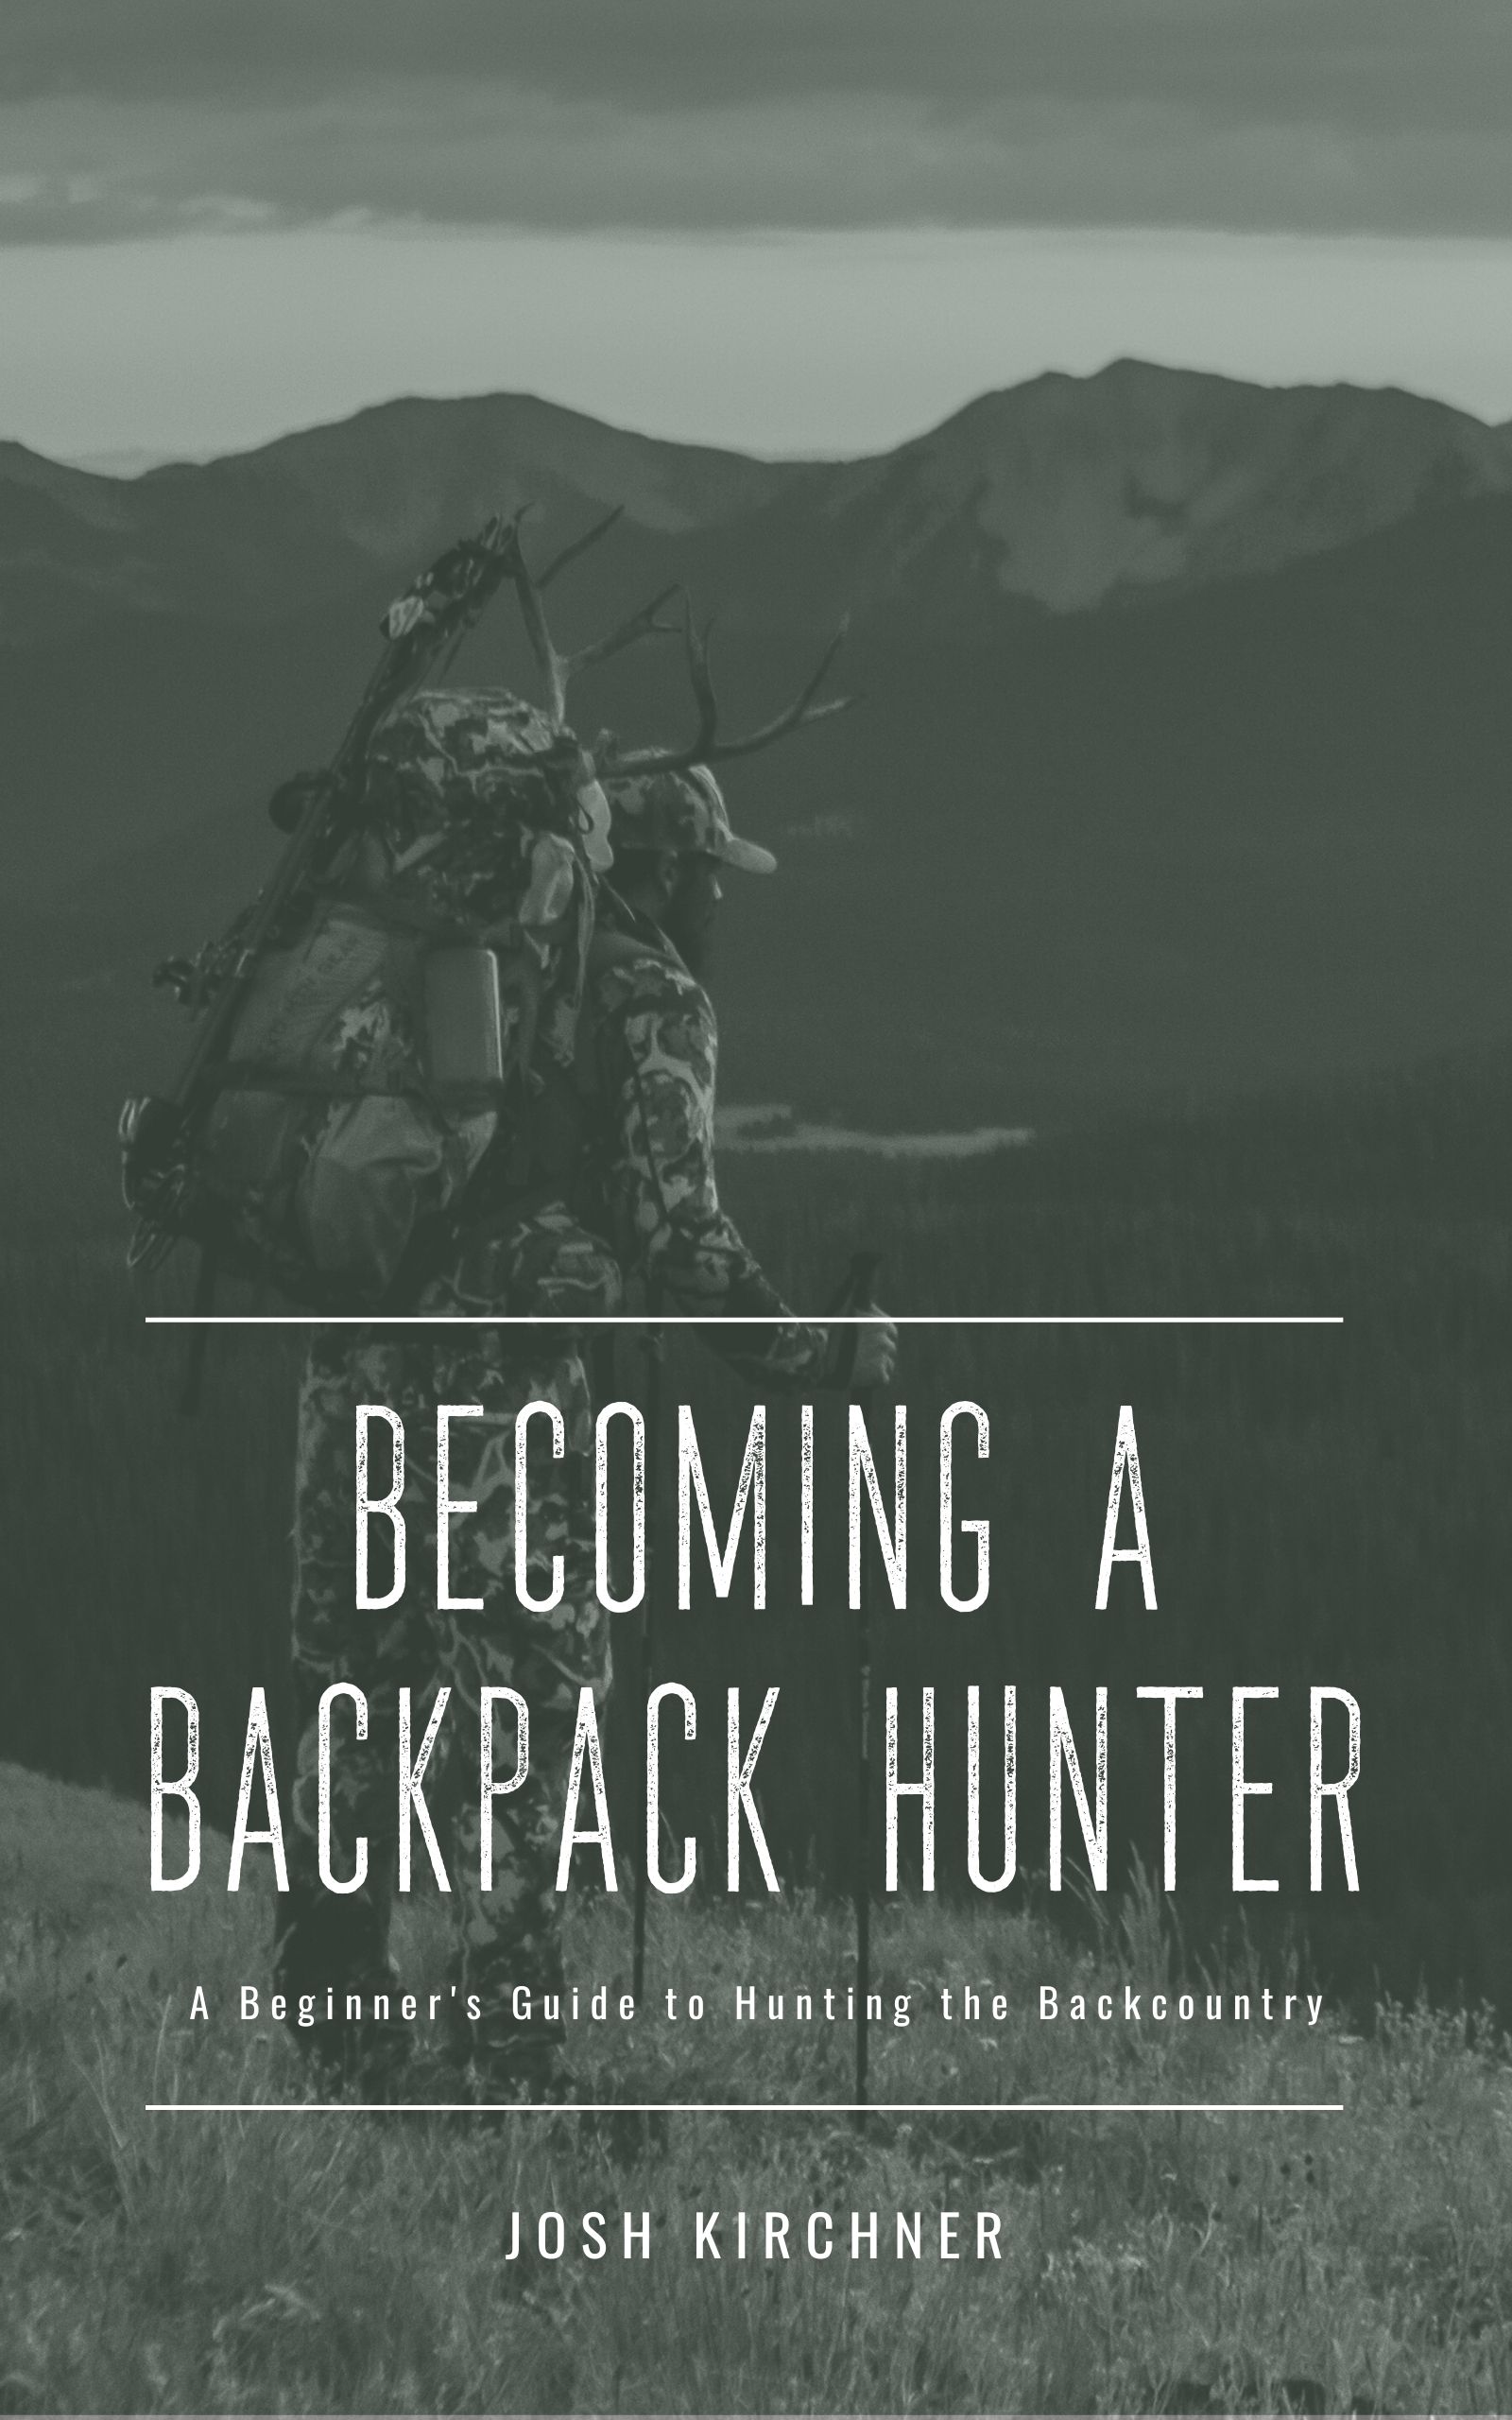 Becoming a Backpack Hunter